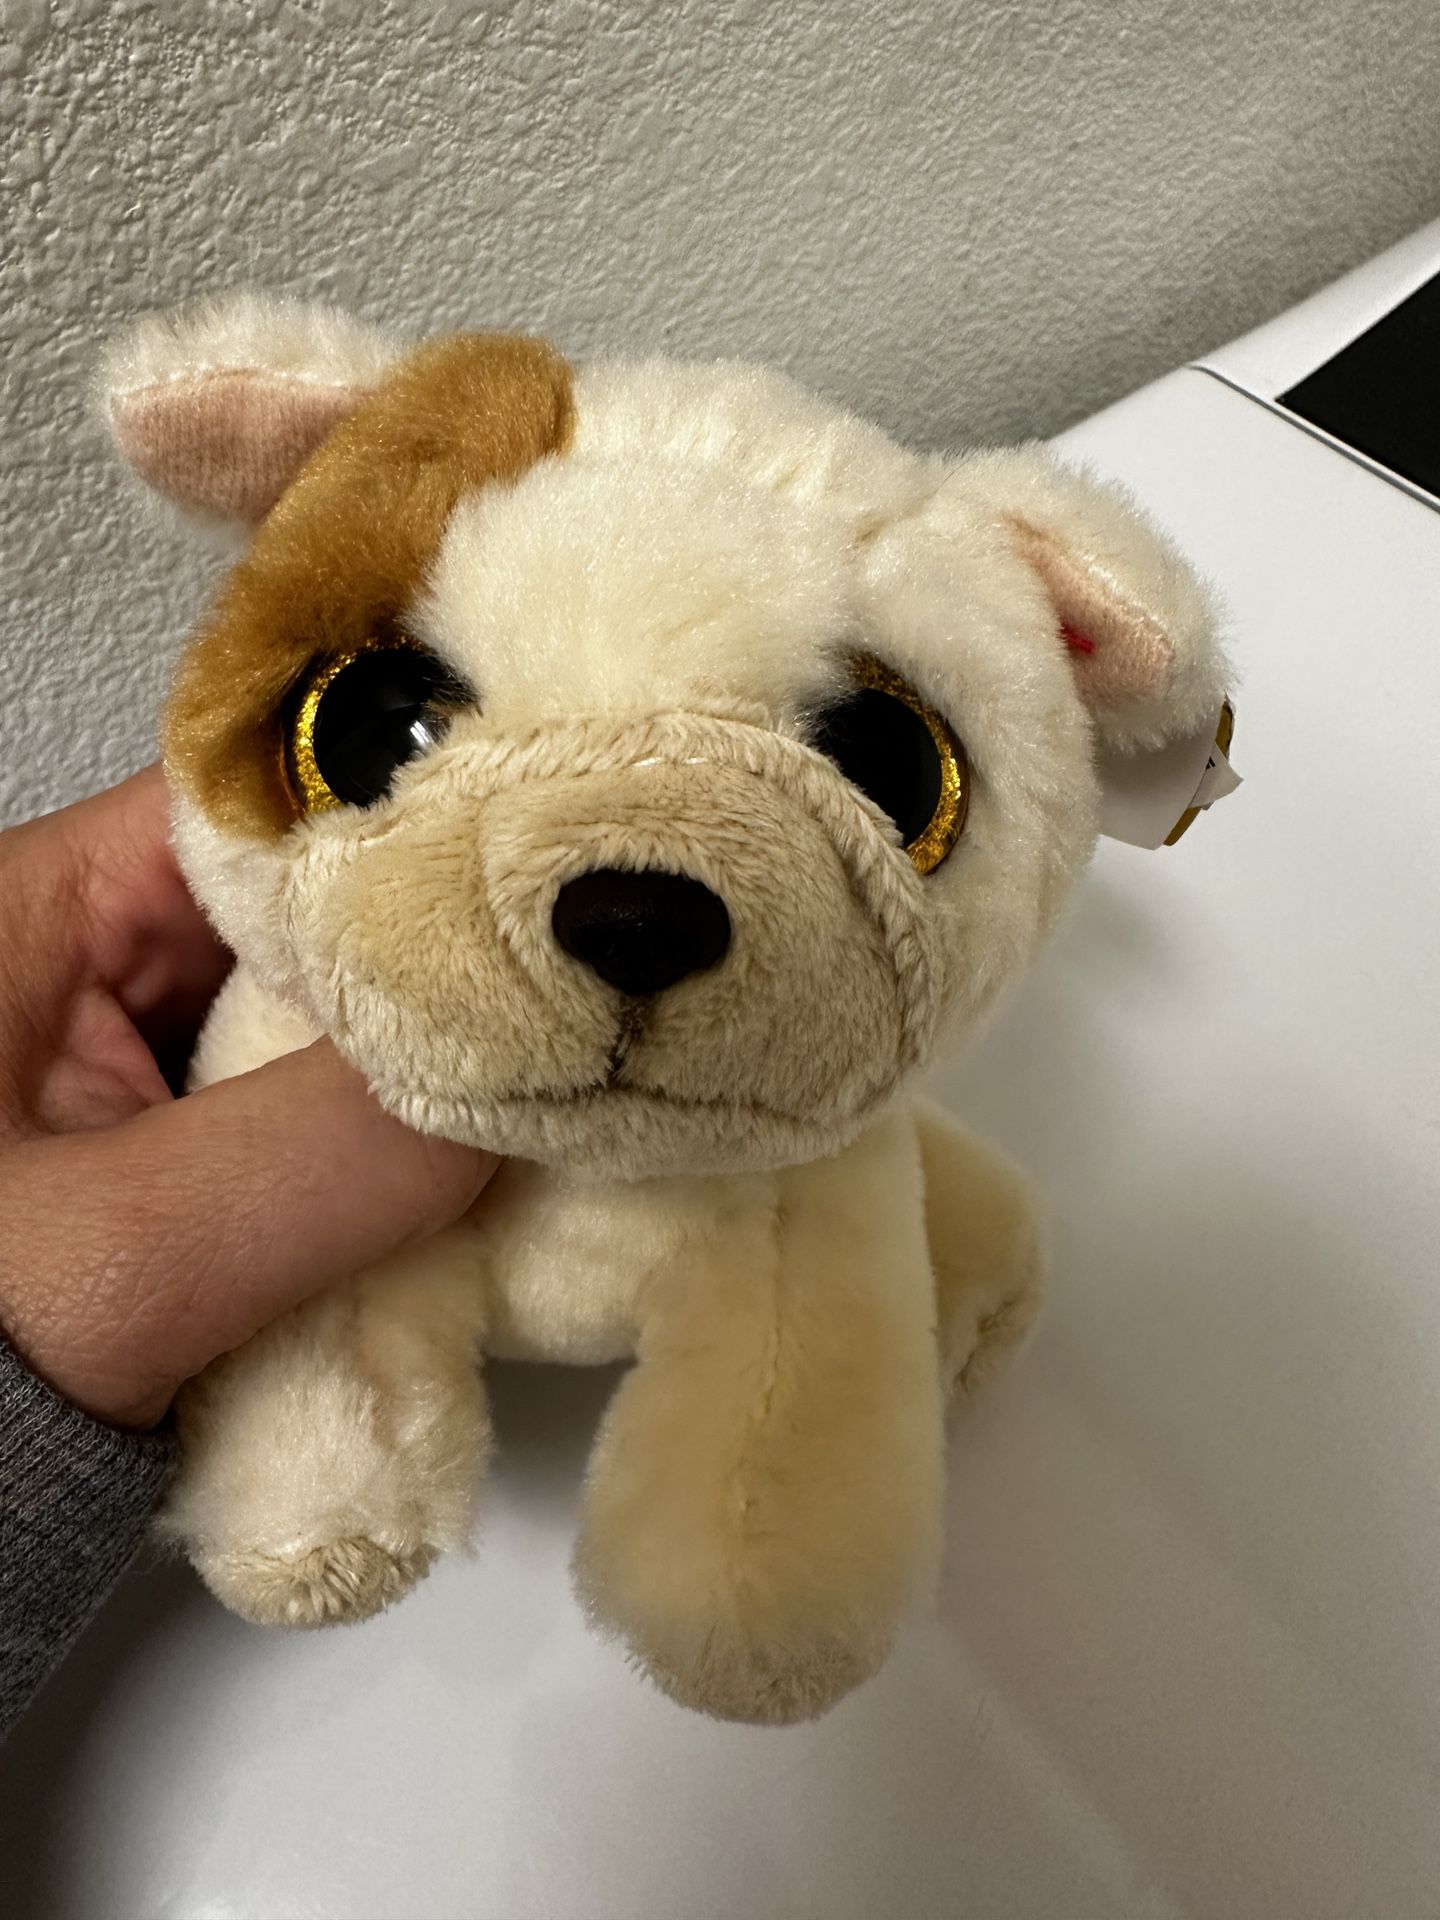 New Ty Puppy Plush "Houghie" Adorable! Honey Color Eyes! 